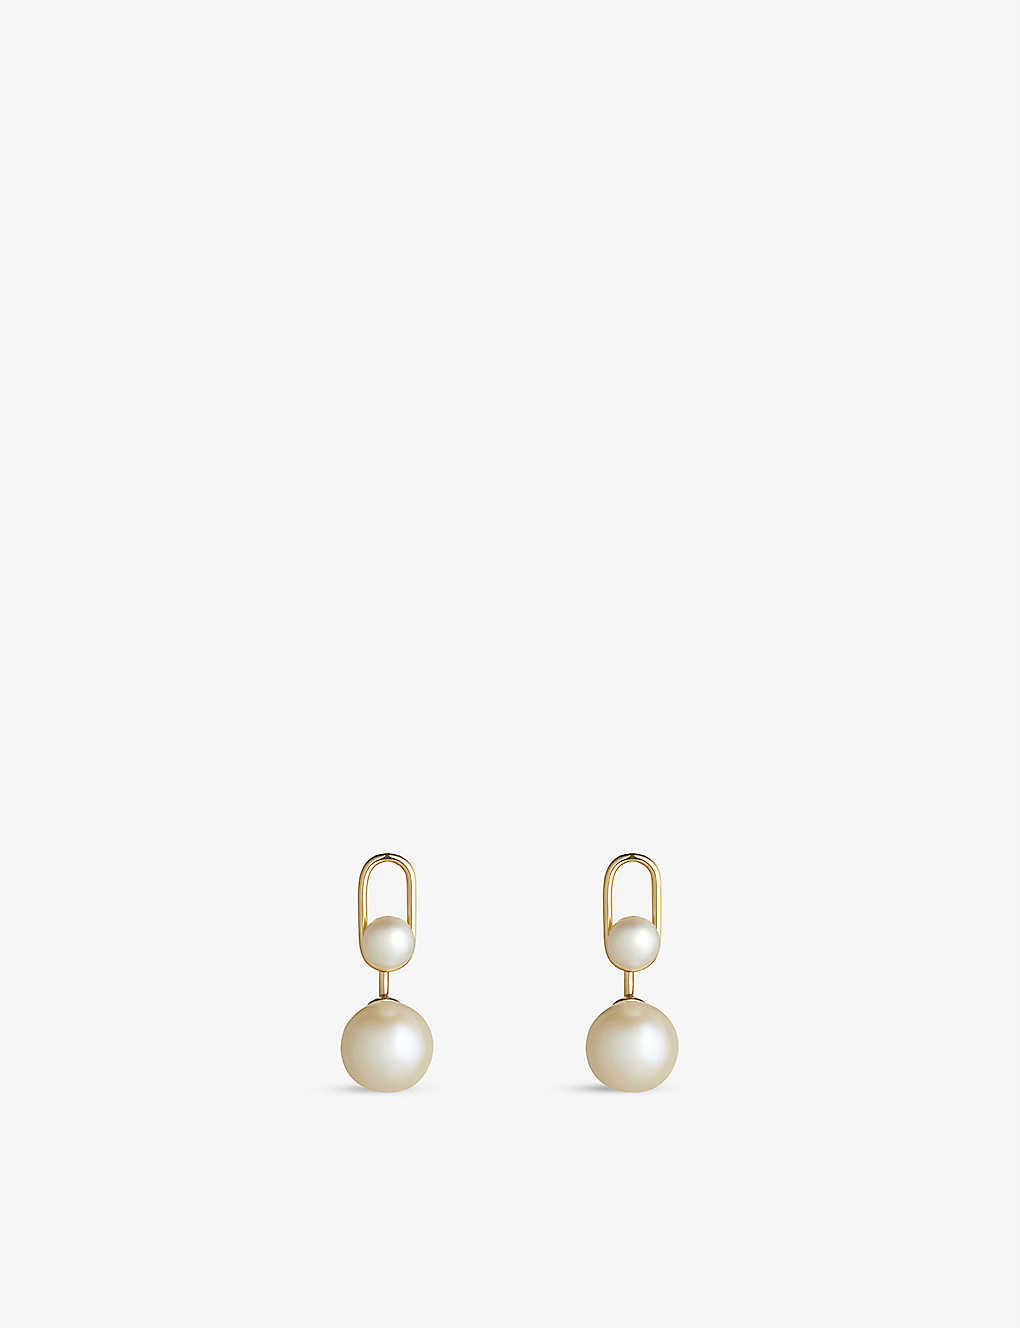 The Alkemistry Ruifier Astra Moonlight 18ct Yellow-gold And Akoya Pearl Earrings In 18ct Yellow Gold